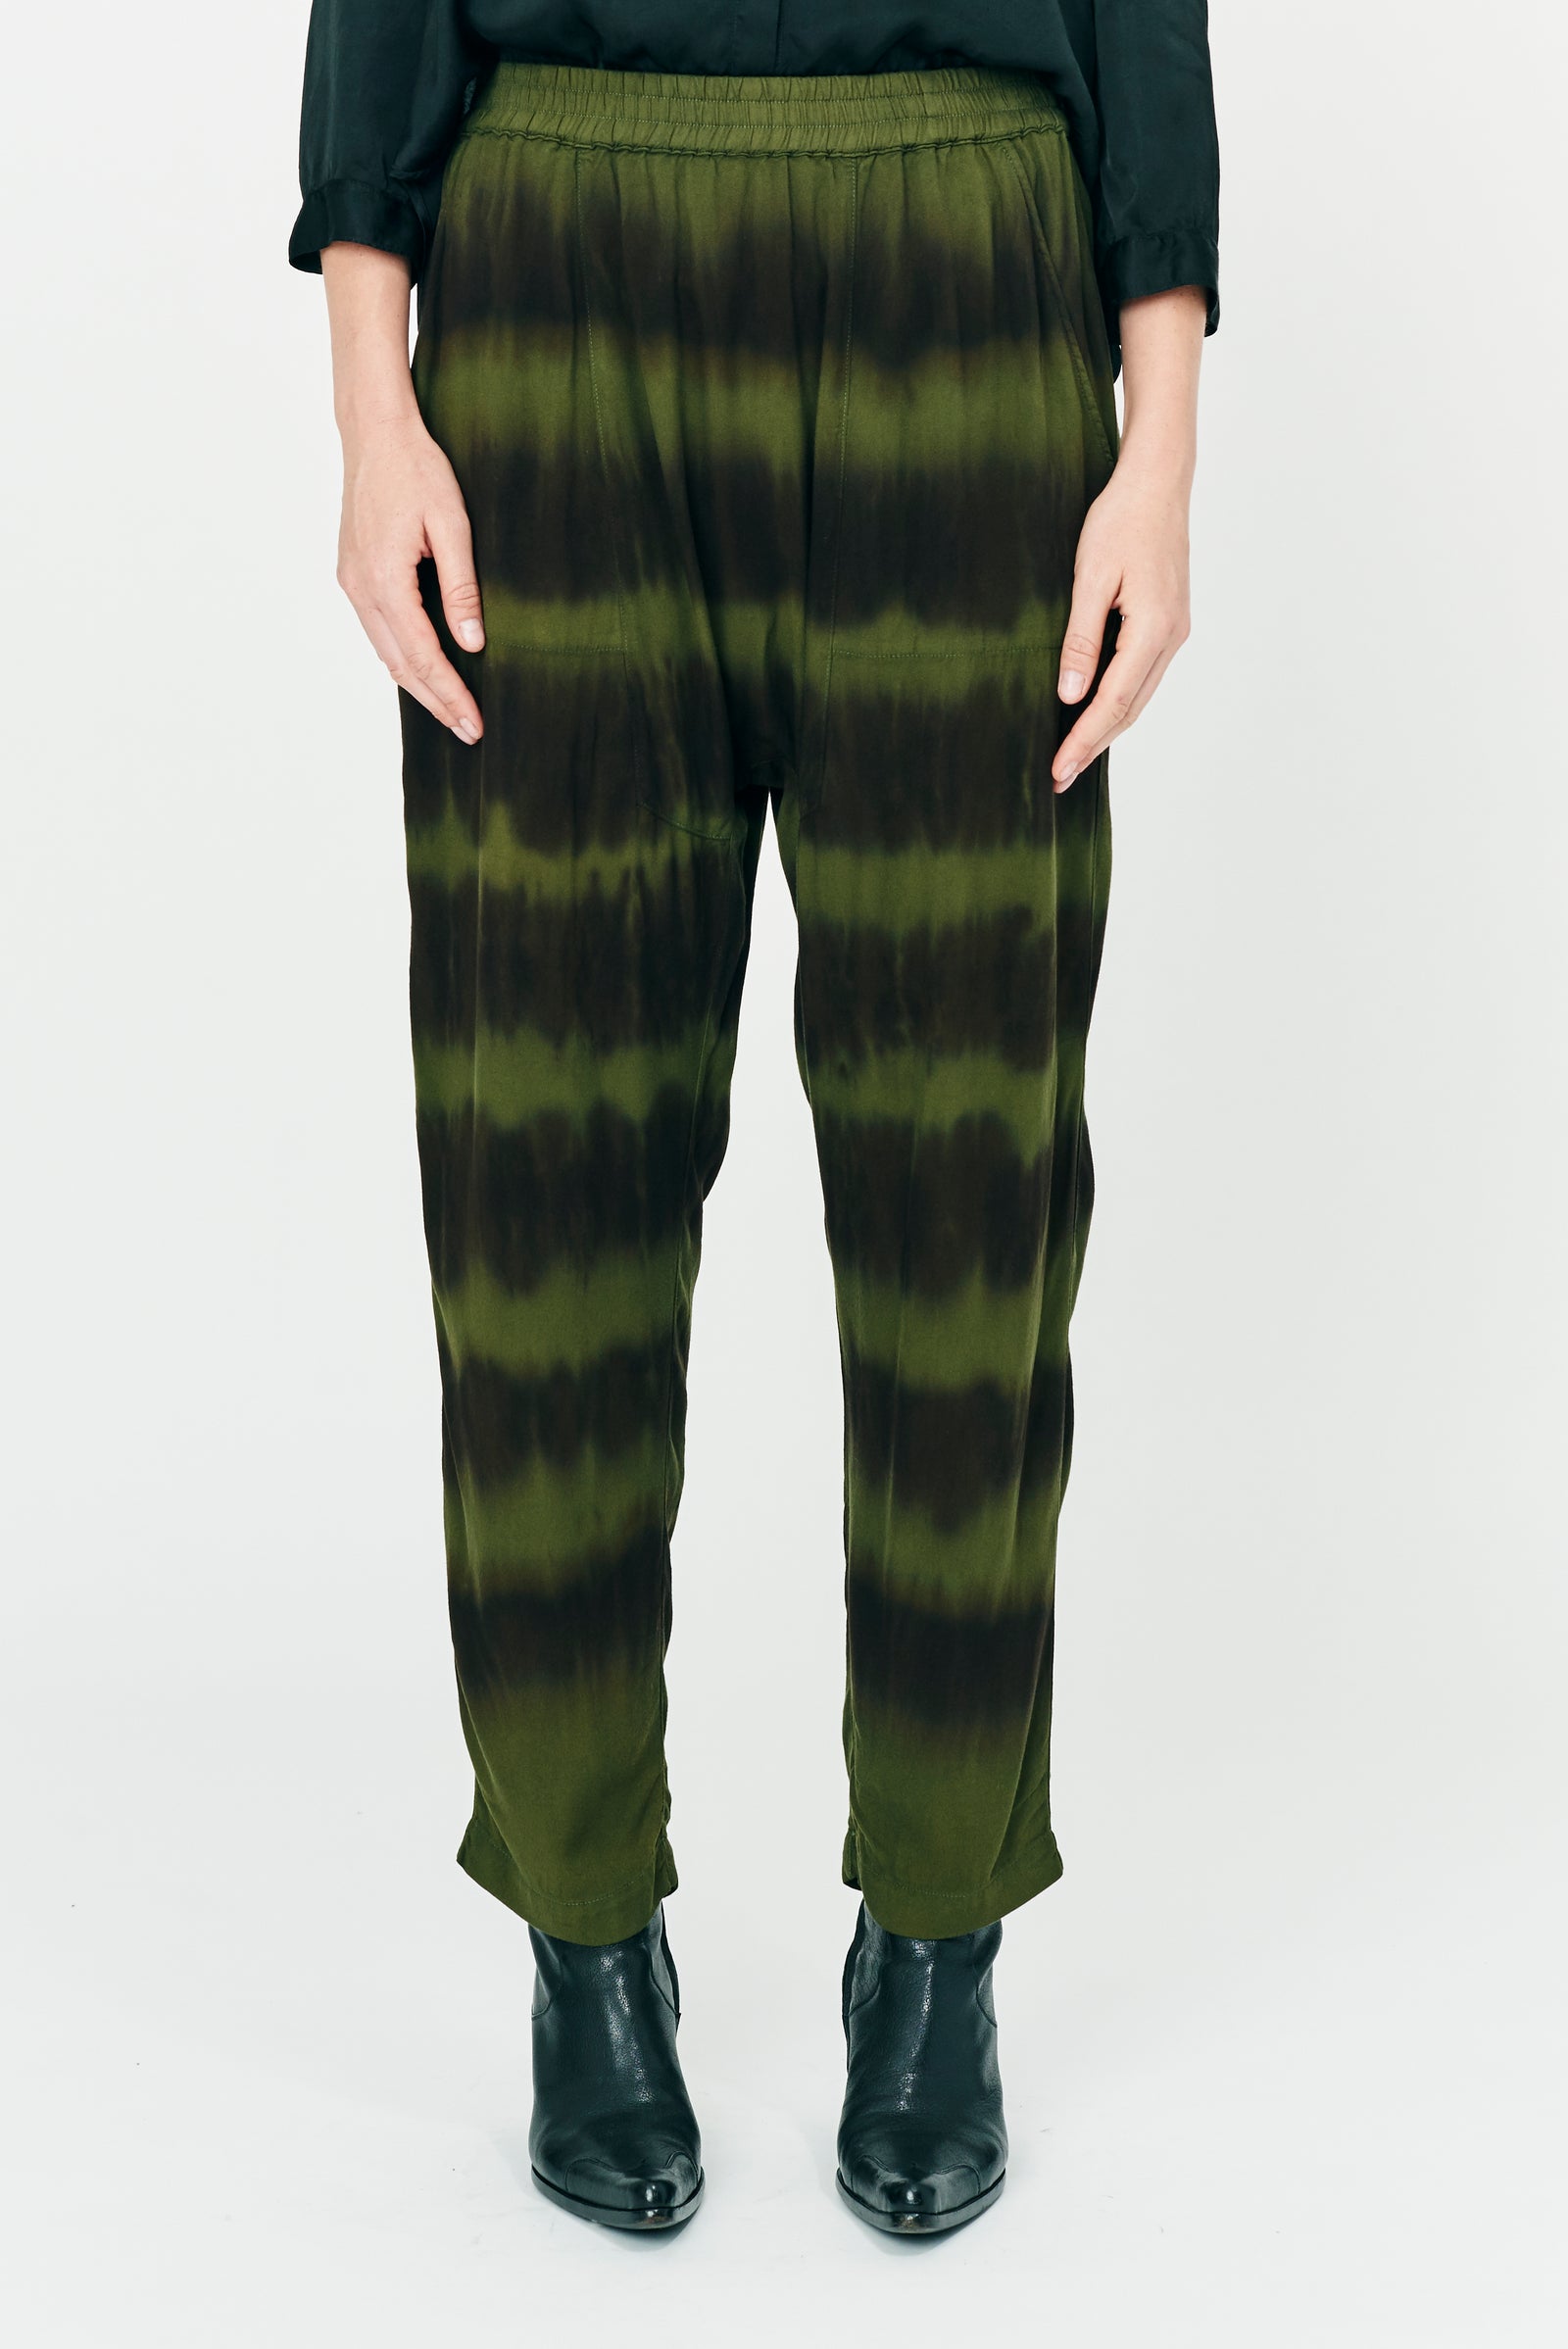 Forest Black and Stripes Tie Dye Ghost Ranch Soft Twill Sunday Pant Front Close-Up View